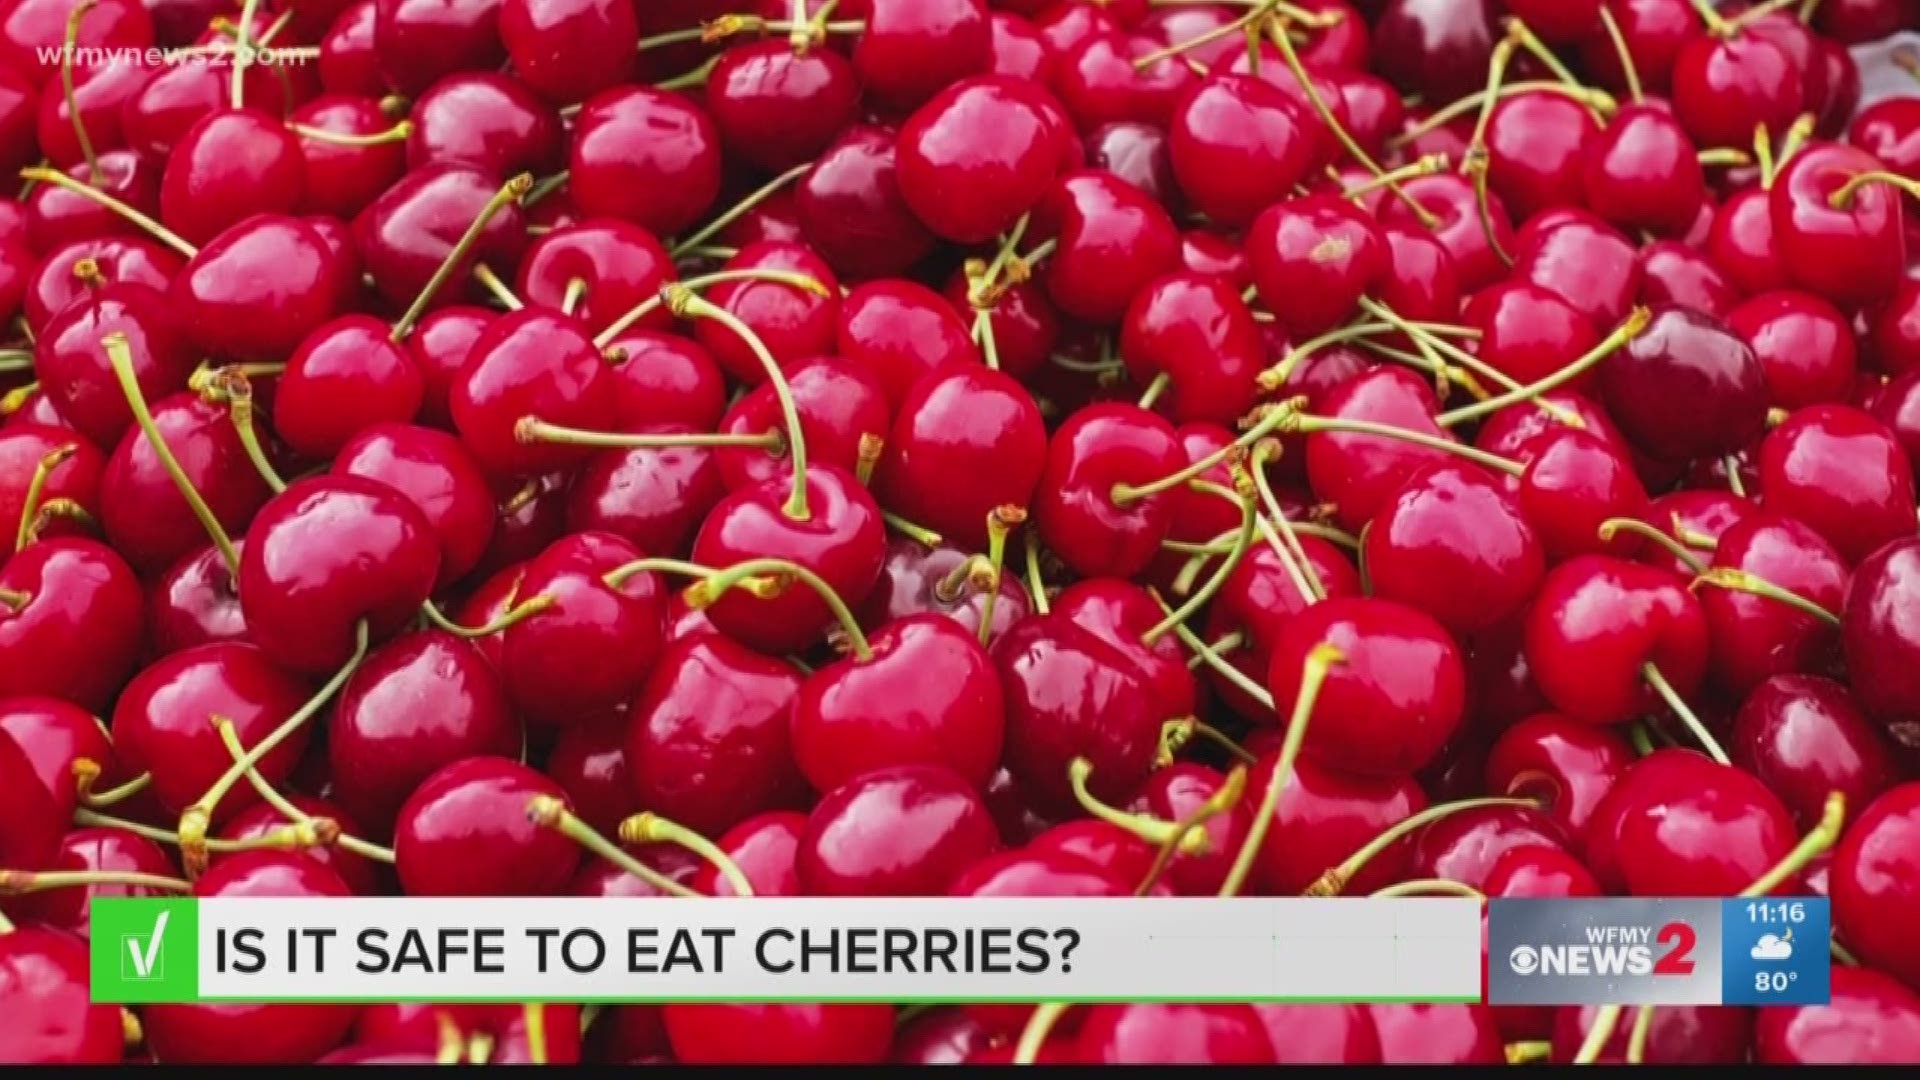 Claims online say that tiny worms could be hiding in cherries. Before you never buy fruit again, we’re verifying those claims for you